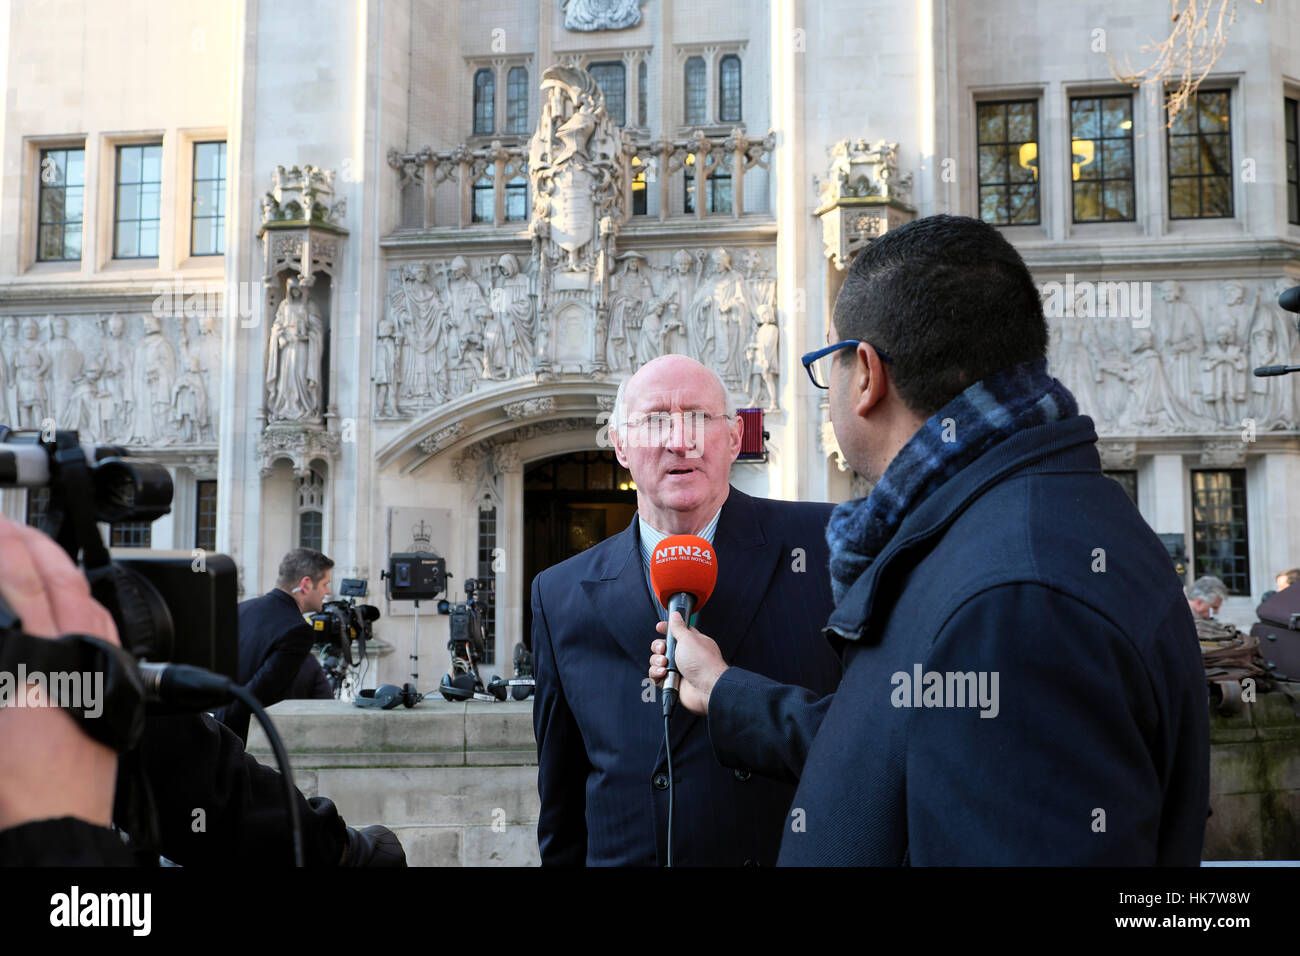 News media, film crews and journalists interview person at Supreme Court after Article 50 ruling in favor of Parliament, London UK   KATHY DEWITT Stock Photo